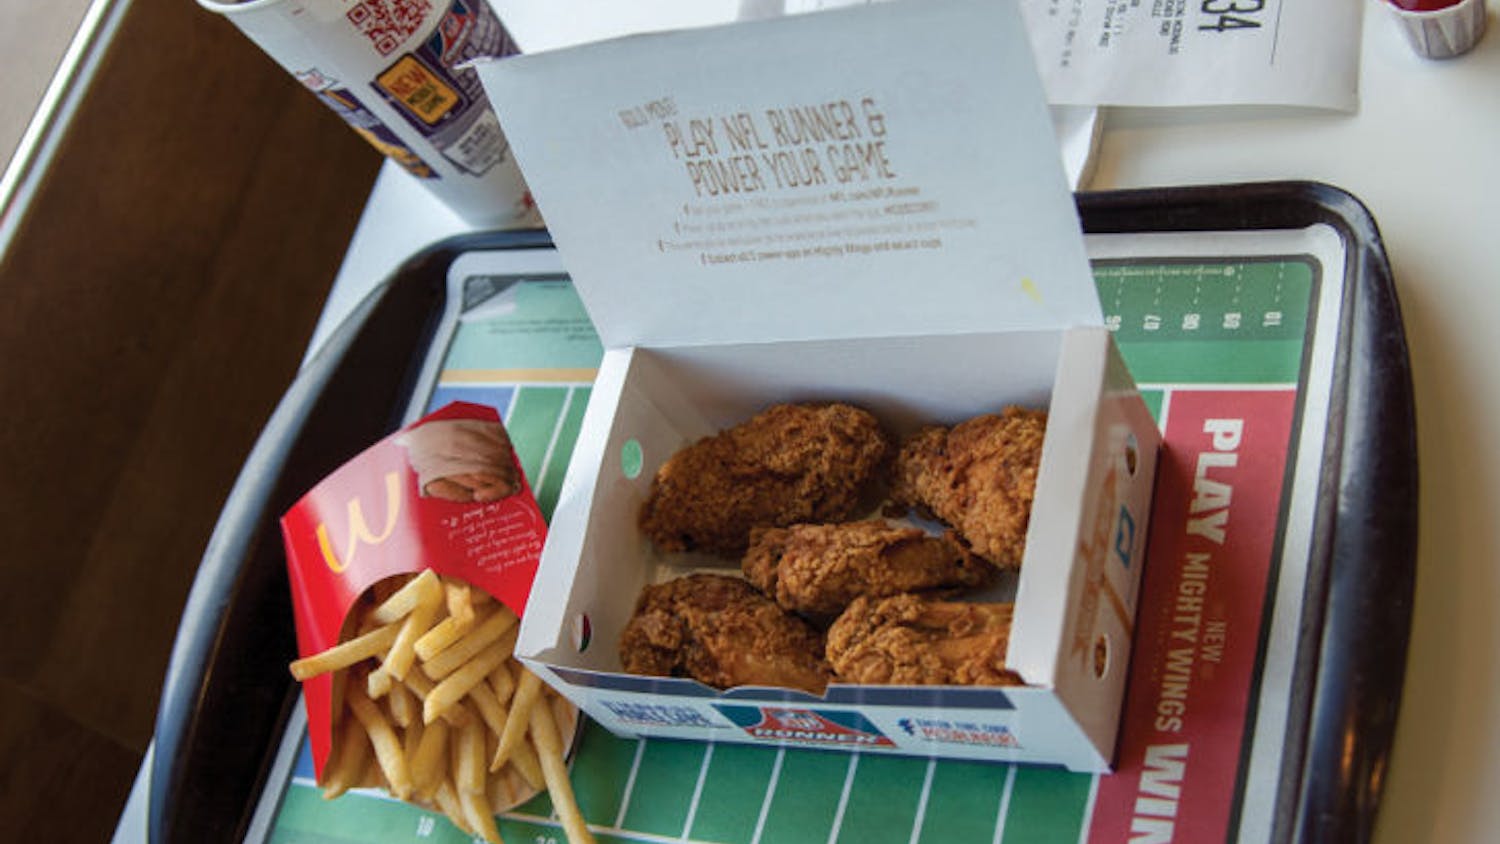 McDonald’s has recently added chicken wings, called Mighty Wings, to its menu. The wings come in sets of three, five and 10, at $2.99, $4.79 and $8.99, respectively.